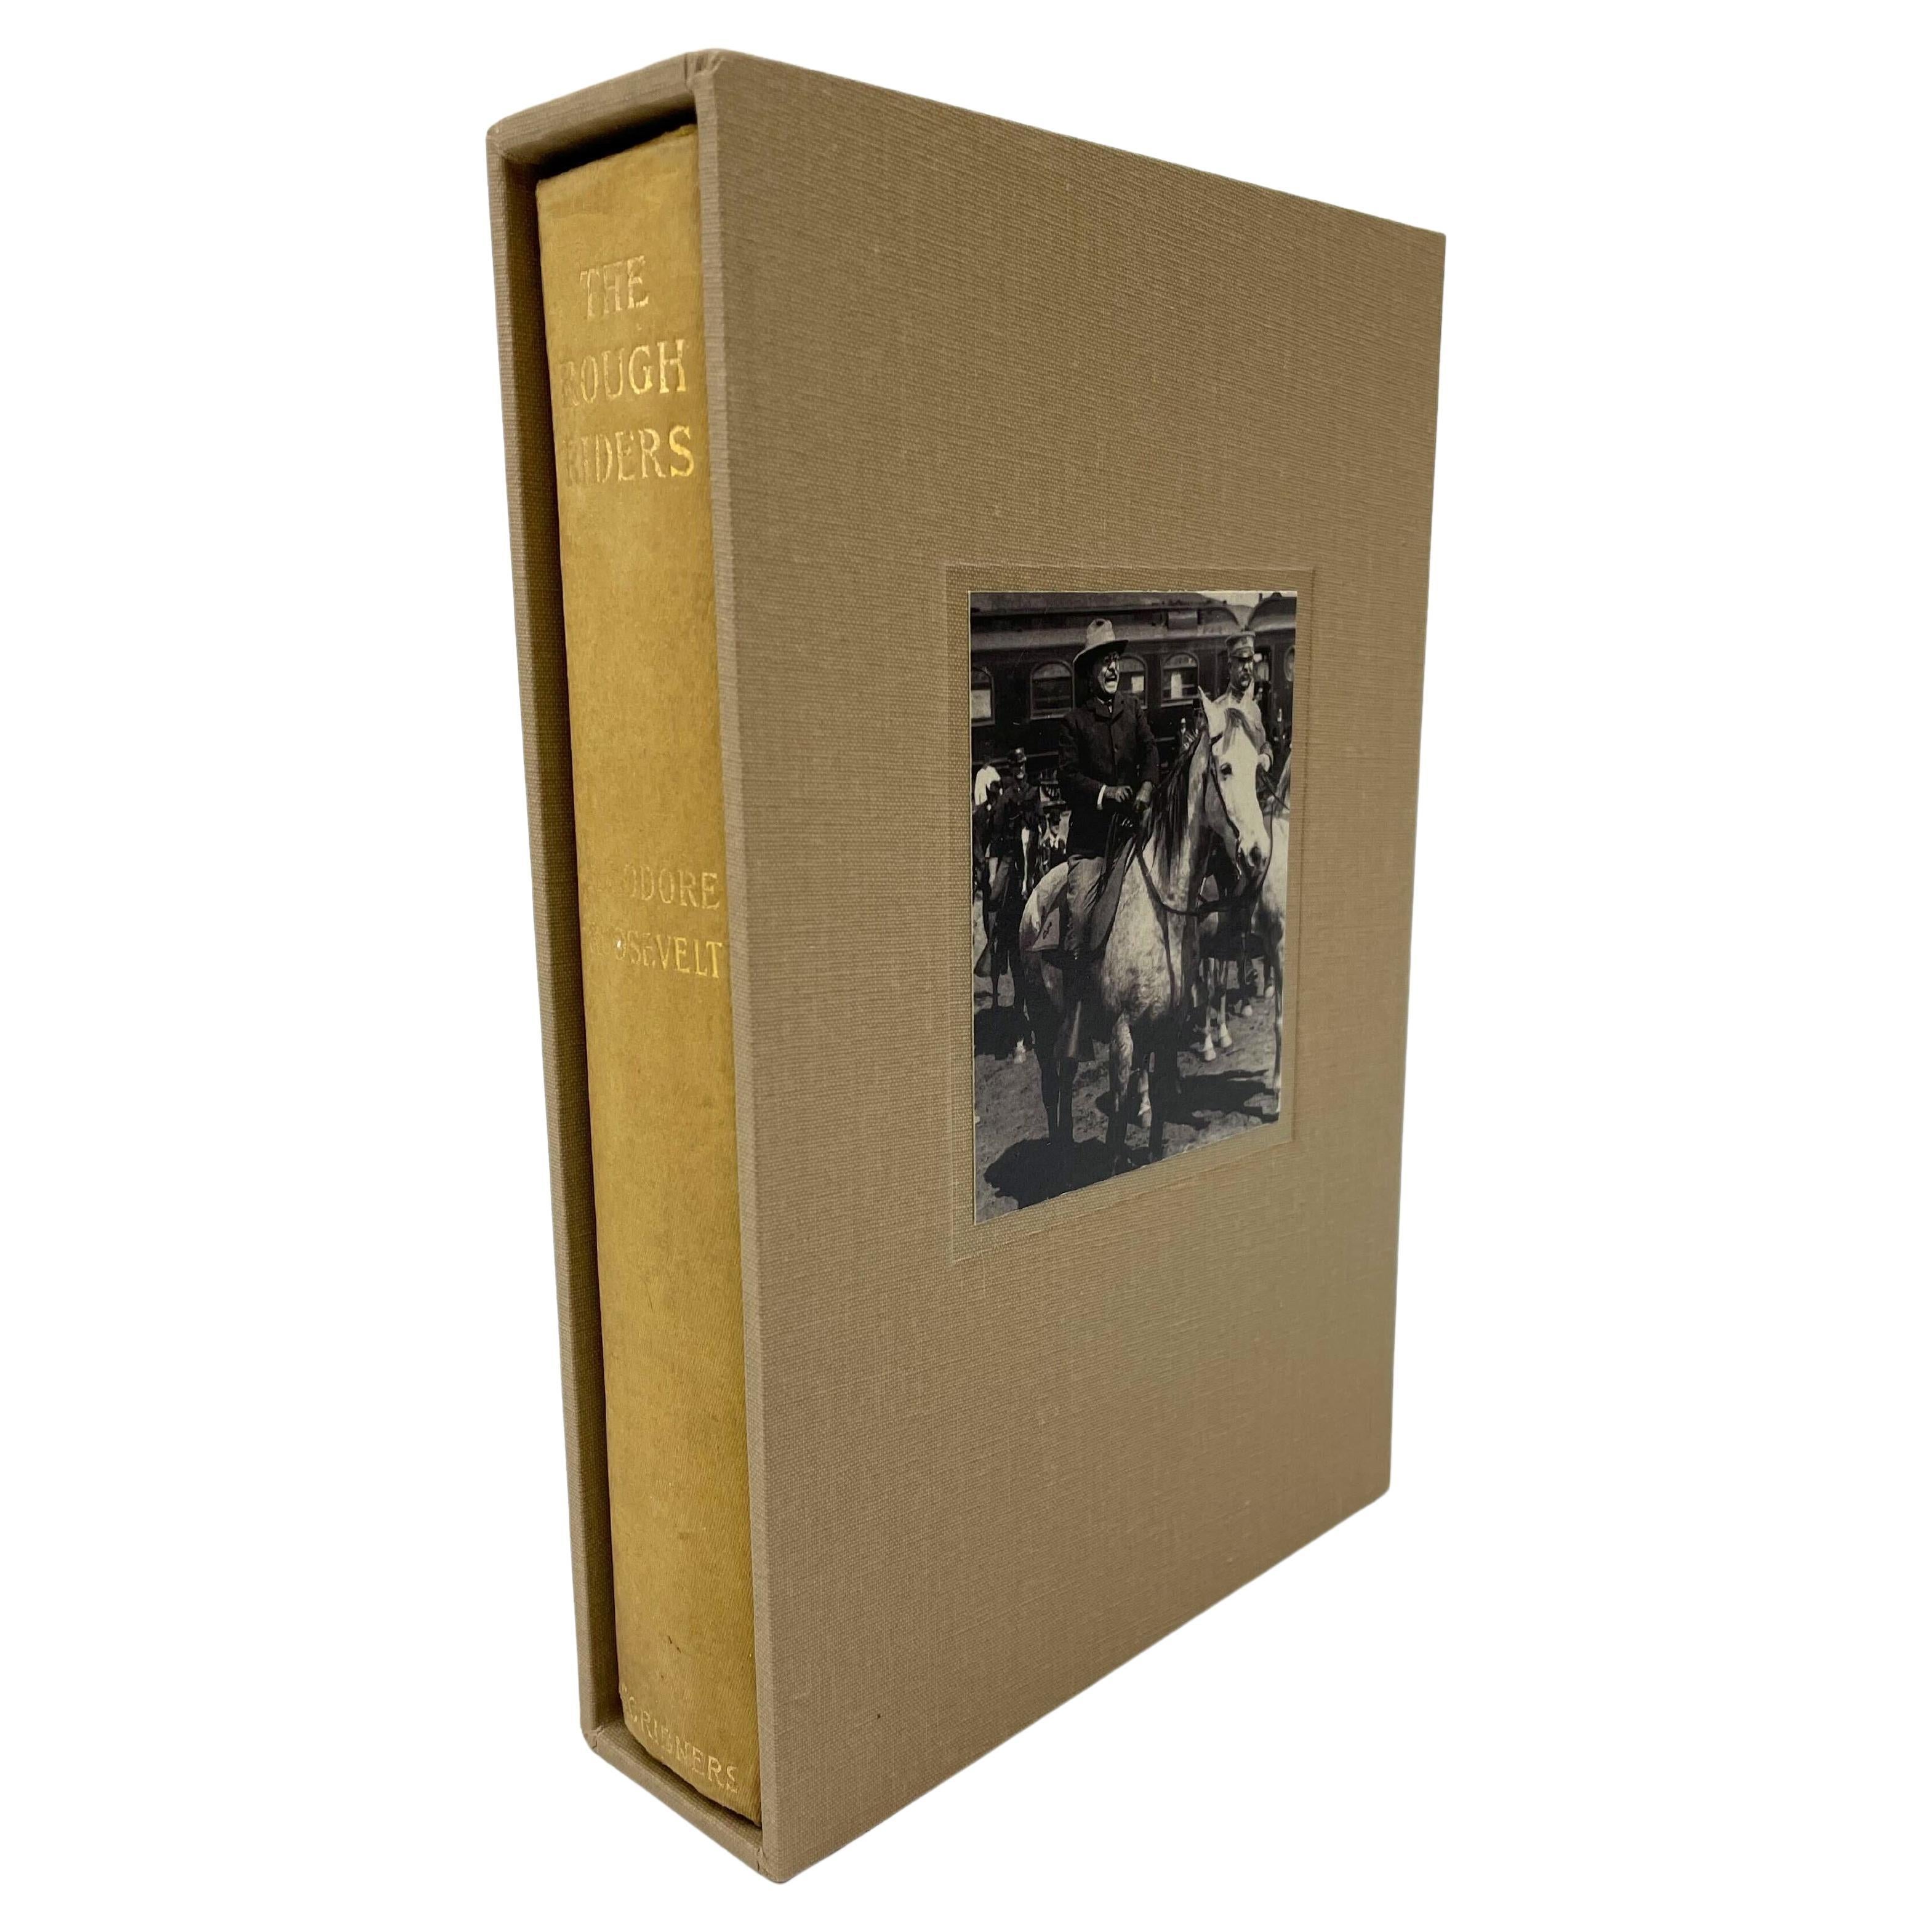 Roosevelt, Theodore, The Rough Riders. New York: Charles Scribner's Sons, 1899. Octavo. First Edition. Illustrated with plates throughout. Presented in original olive green cloth boards, with gilt titles to the spine. With a new archival matching